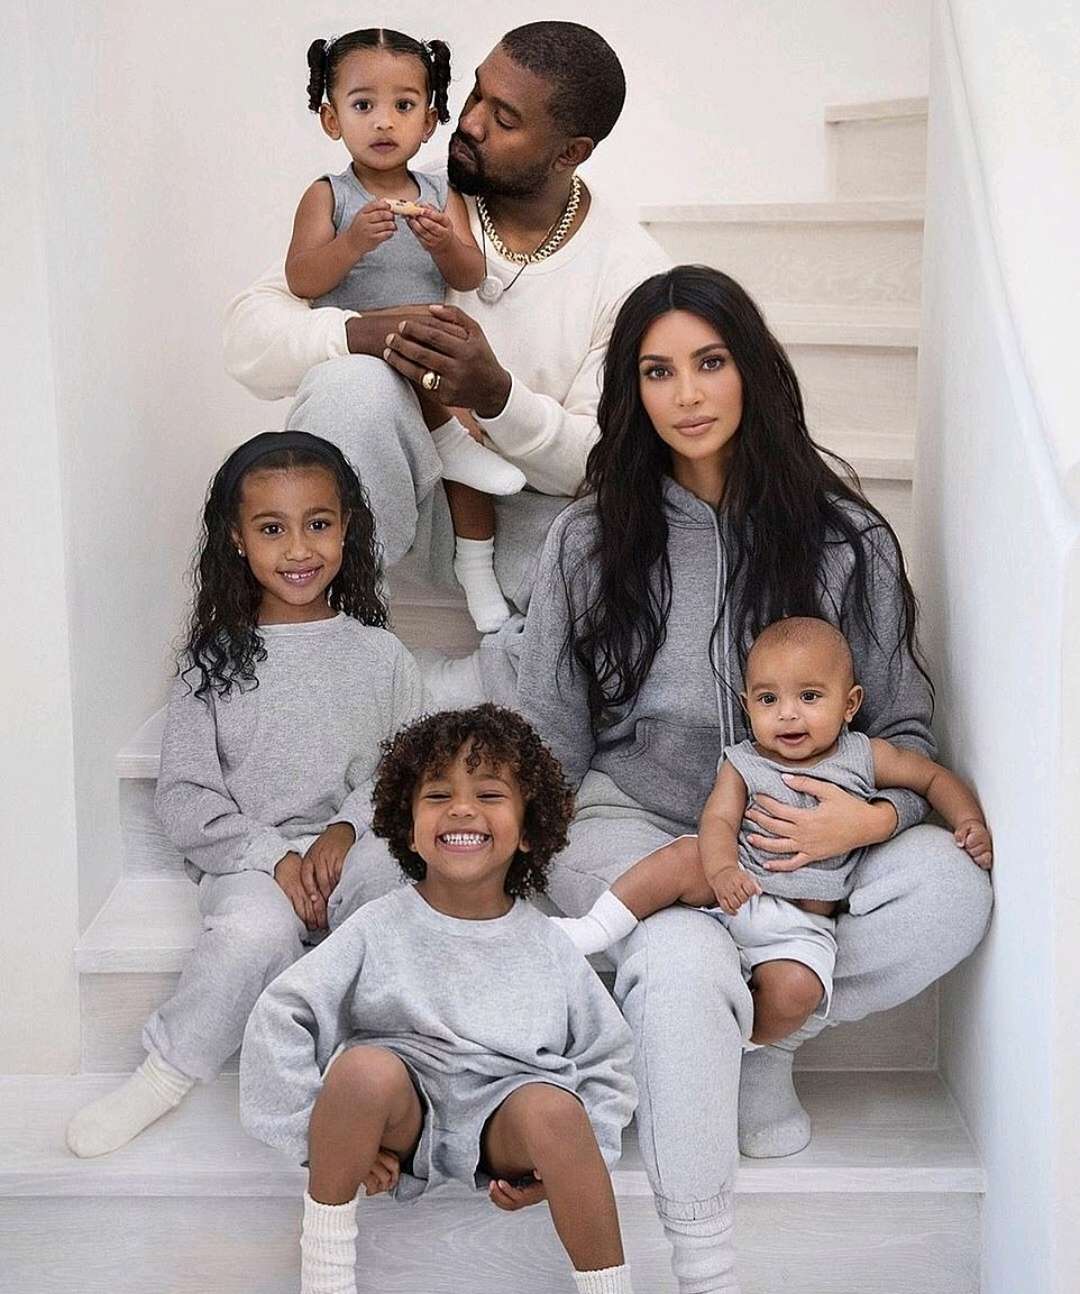 Kanye West publicly feuded with Kim over where their children would attend school